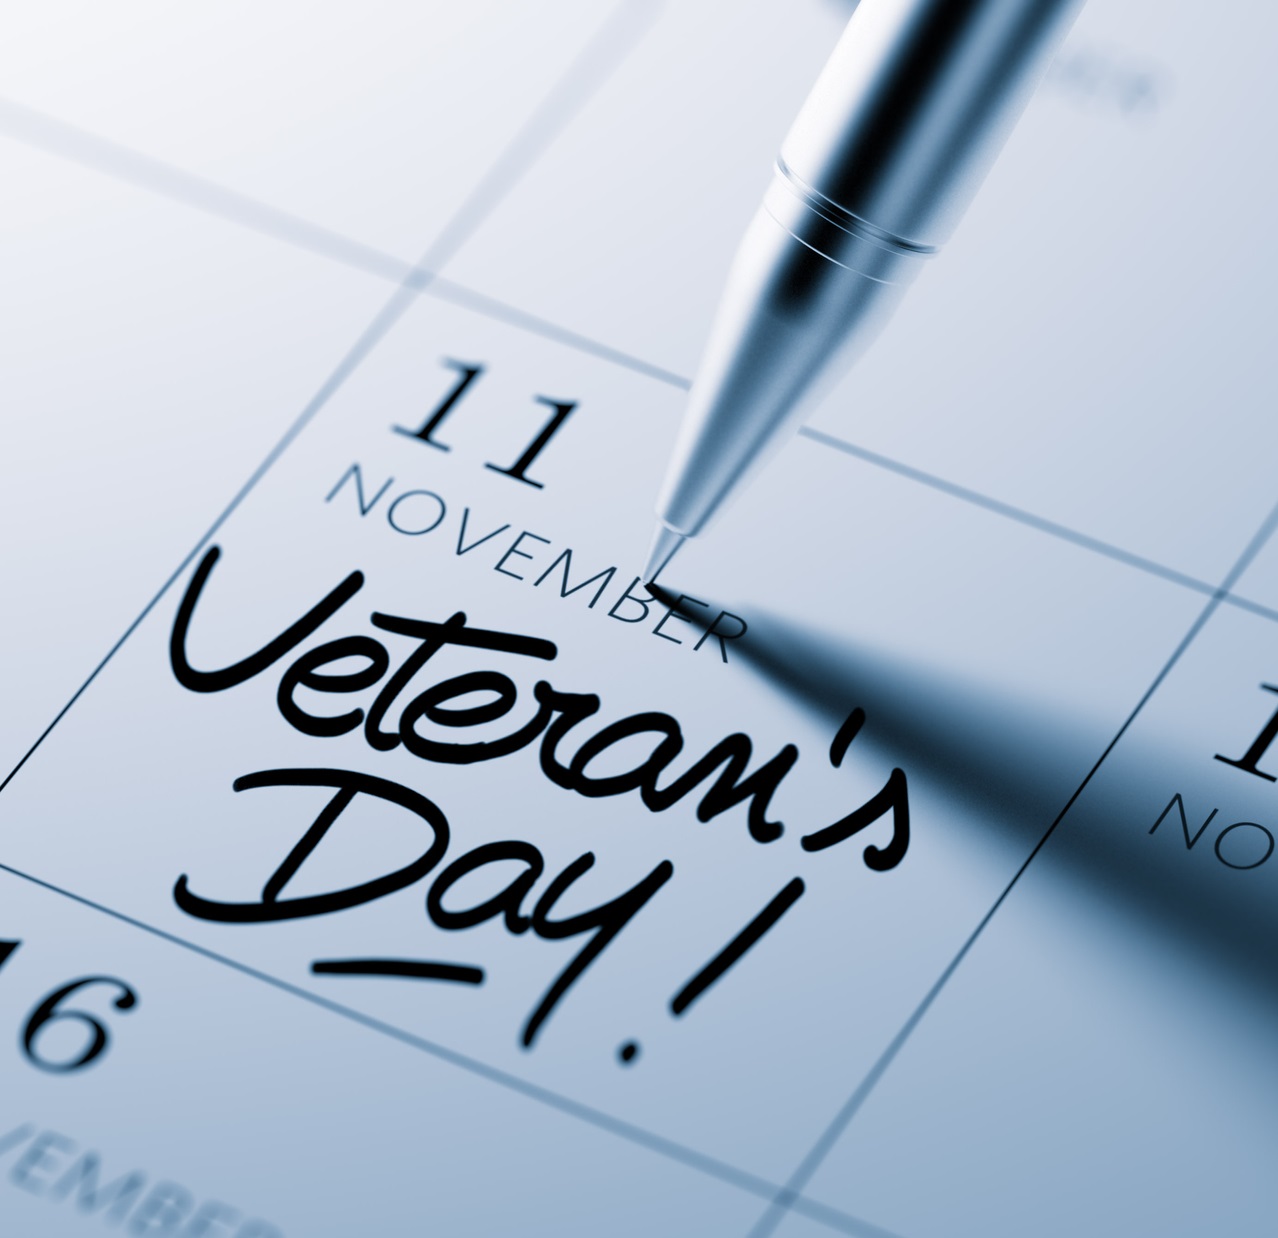 Photo for CITY OFFICES TO OBSERVE VETERAN&rsquo;S DAY HOLIDAY